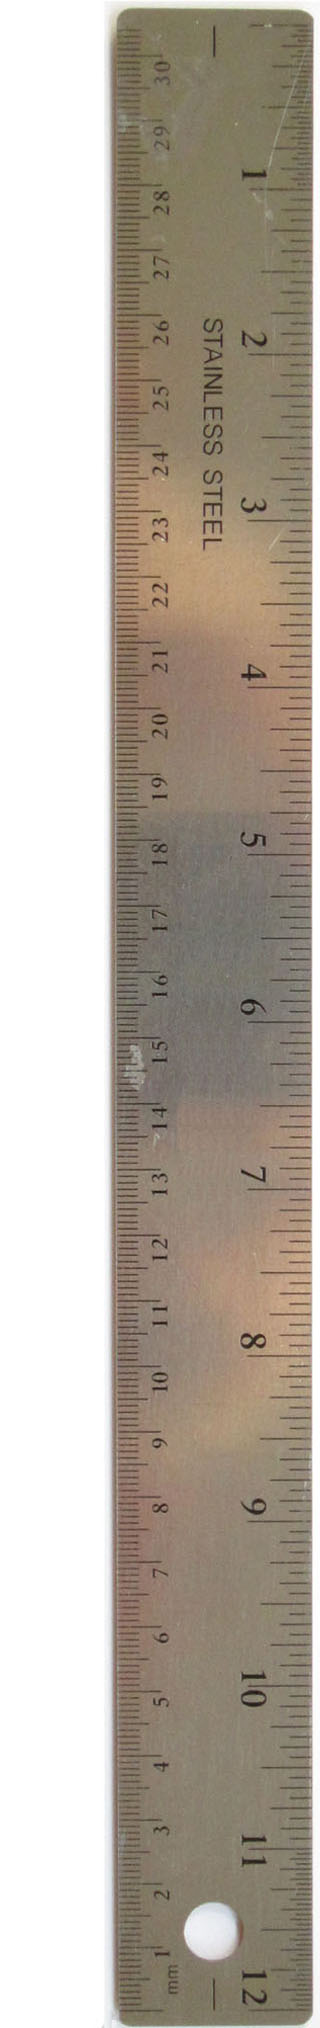 Stainless-12-inch-ruler-iPhone